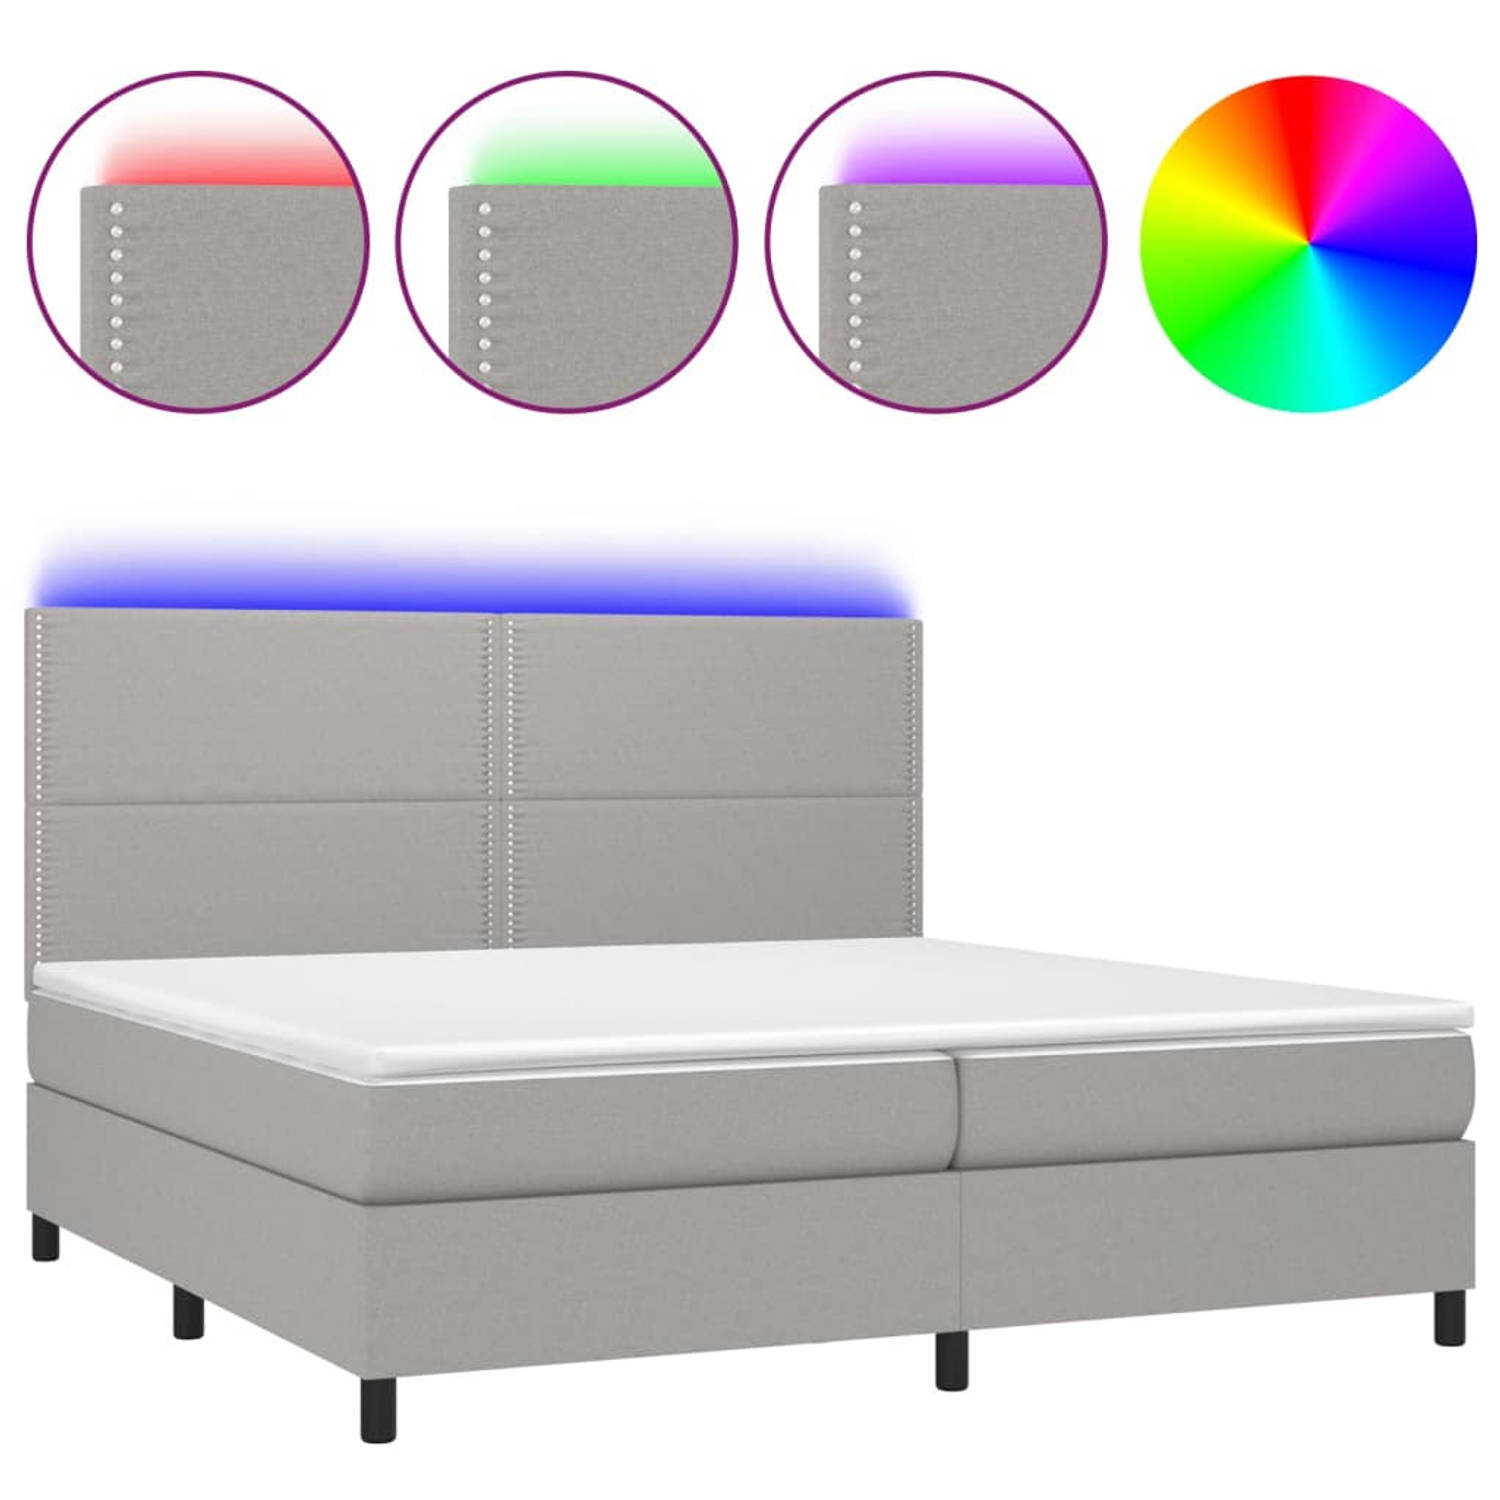 The Living Store Boxspring met matras en LED stof lichtgrijs 200x200 cm - Boxspring - Boxsprings - Bed - Slaapmeubel - Boxspringbed - Boxspring Bed - Tweepersoonsbed - Bed Met Matr